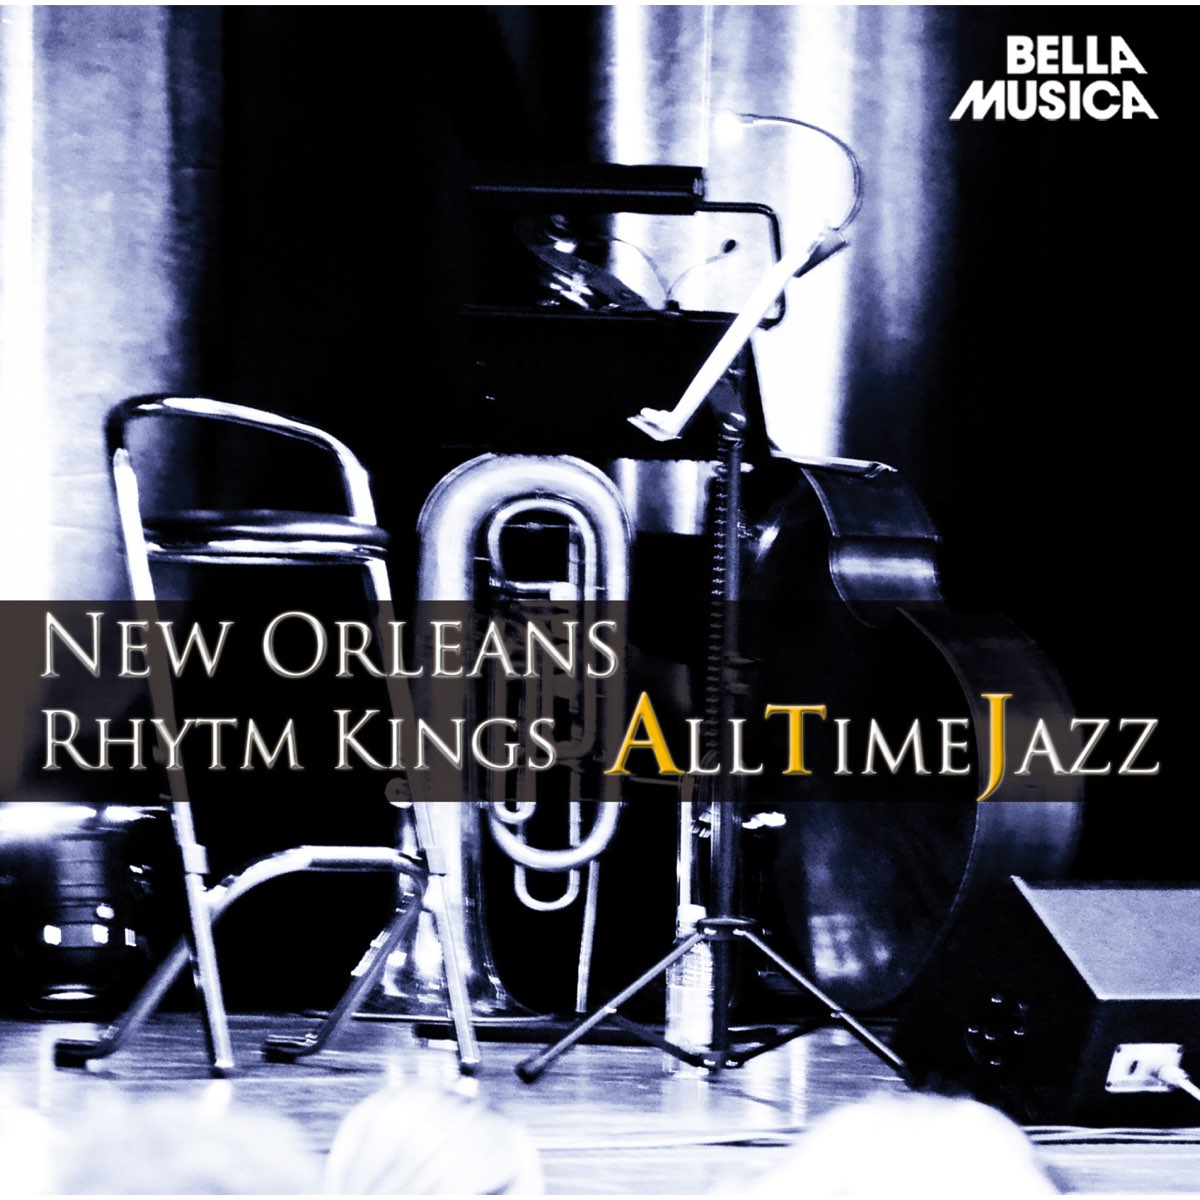 ‎all Time Jazz New Orleans Rhythm Kings By The New Orleans Rhythm Kings On Apple Music 9017